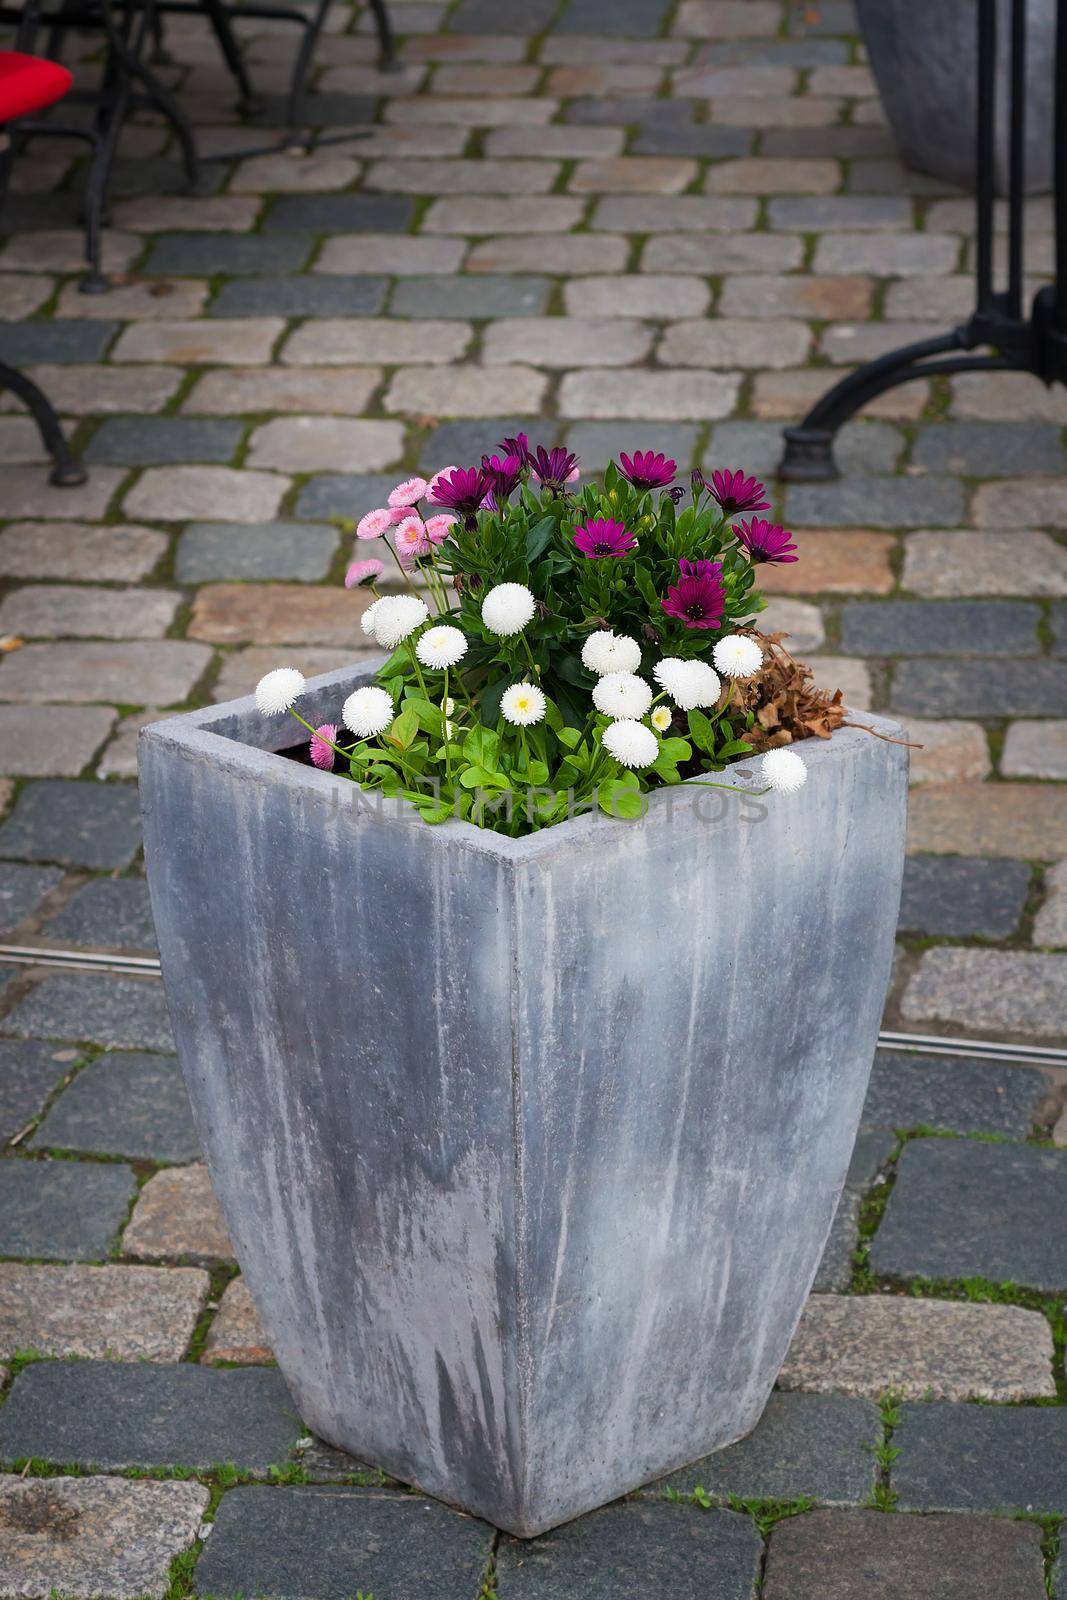 Large pot with plants. Outdoor concrete vase as a flowerbed and street decoration with some flowers.